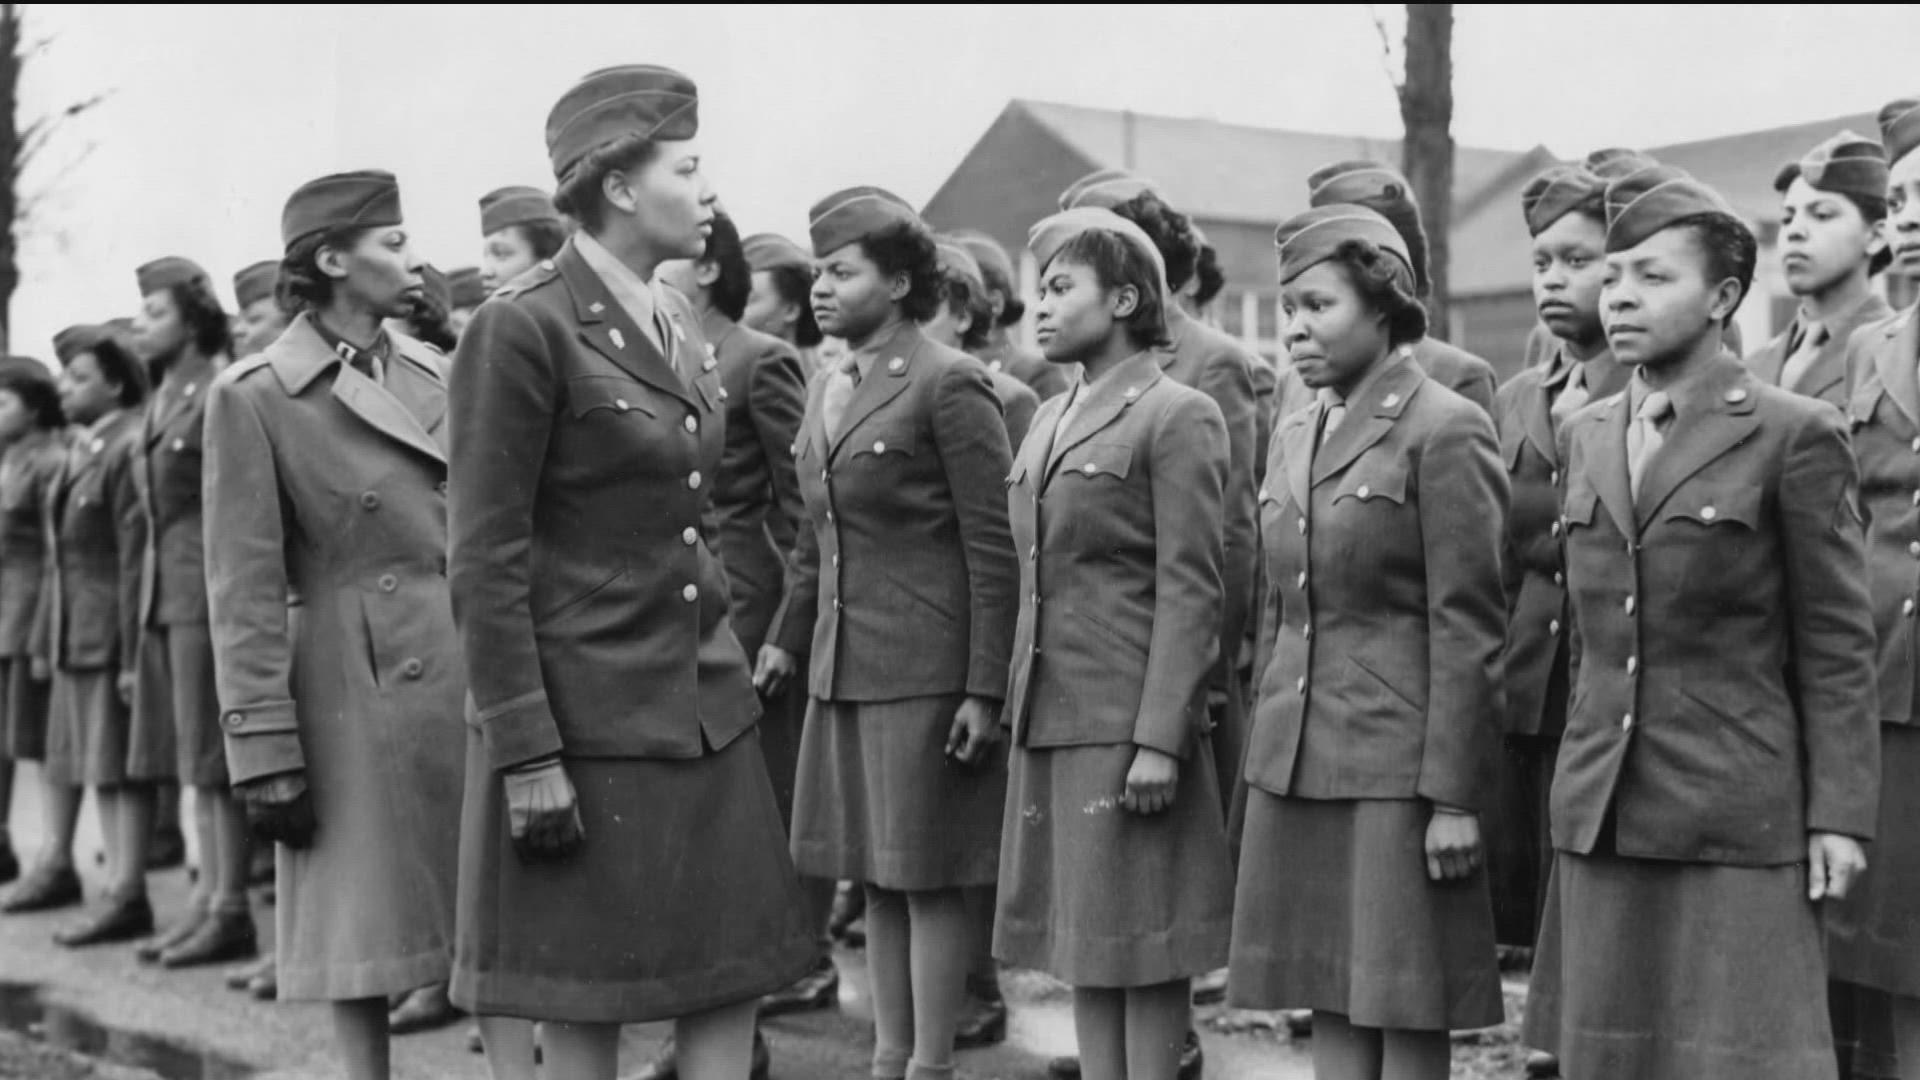 A local non-profit is screening a documentary about the 6888th Battalion who served during WWII as part of Black History Month.